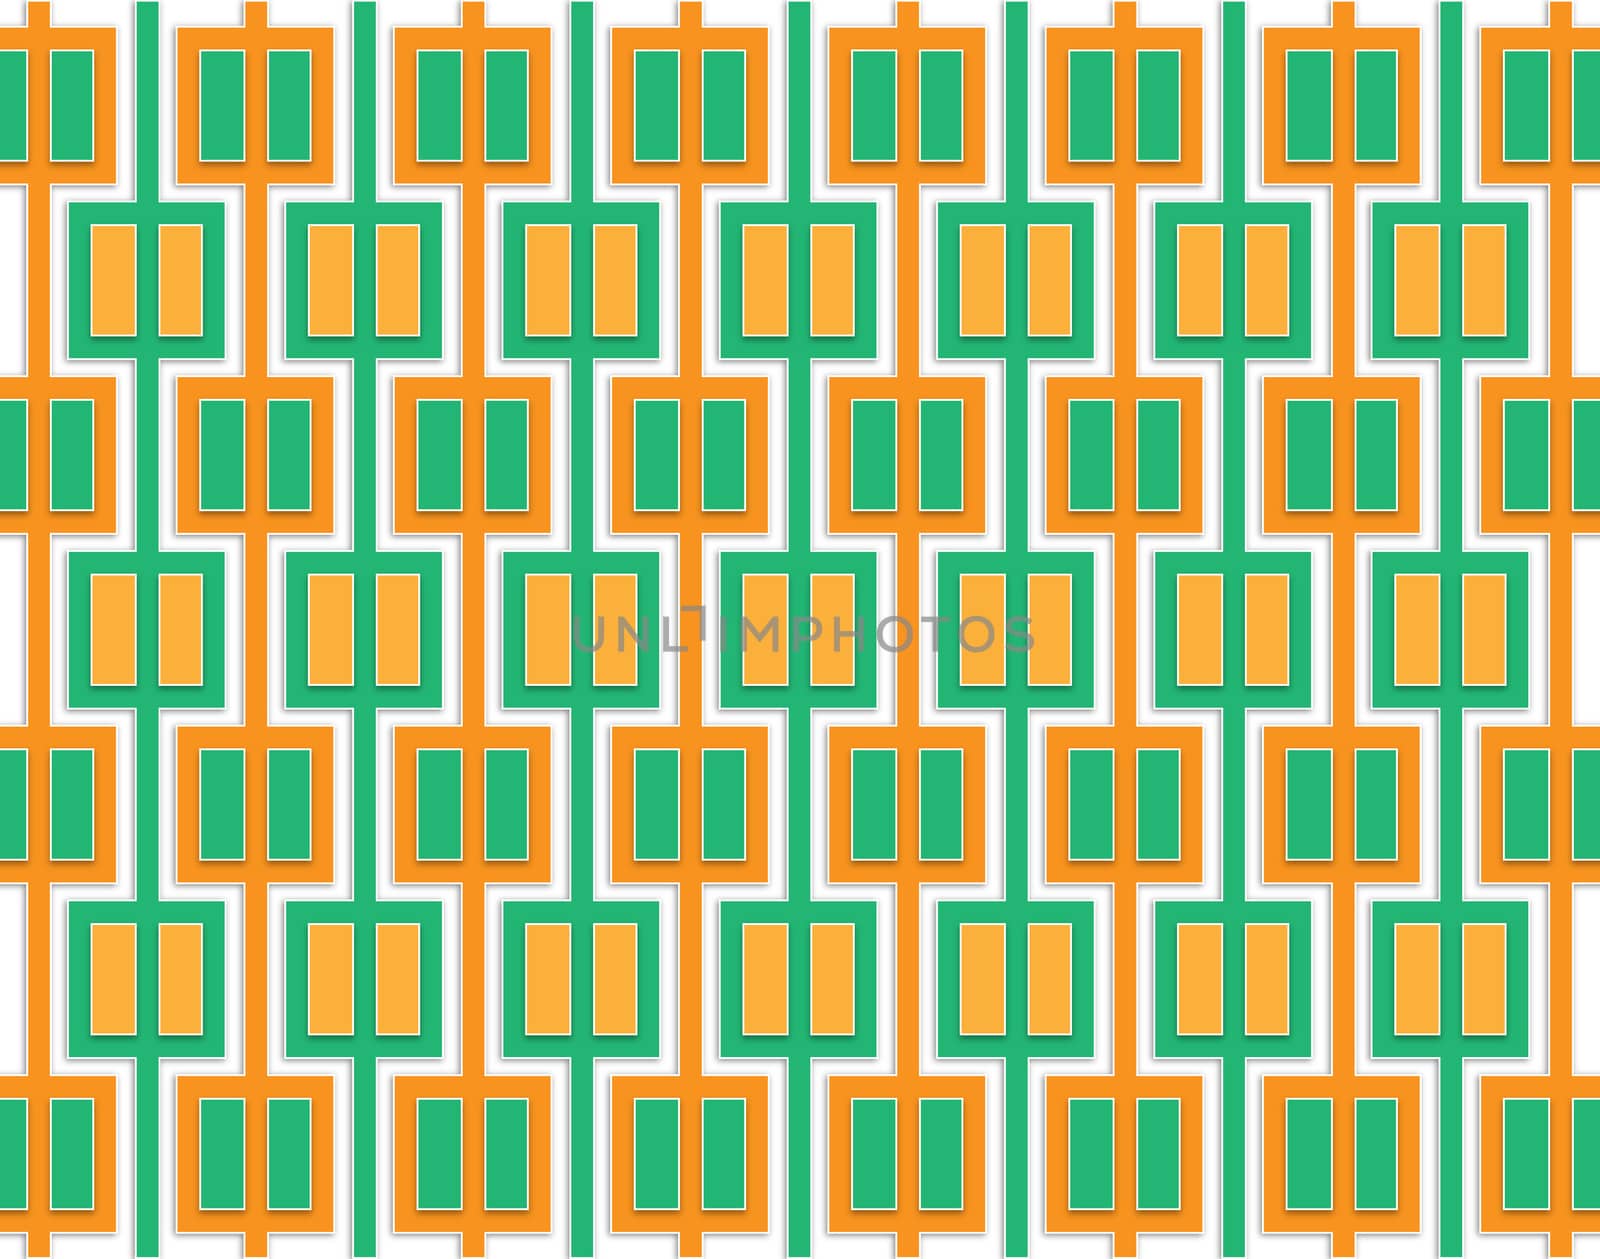 Abstract pattern of orange and green squares by Ahojdoma